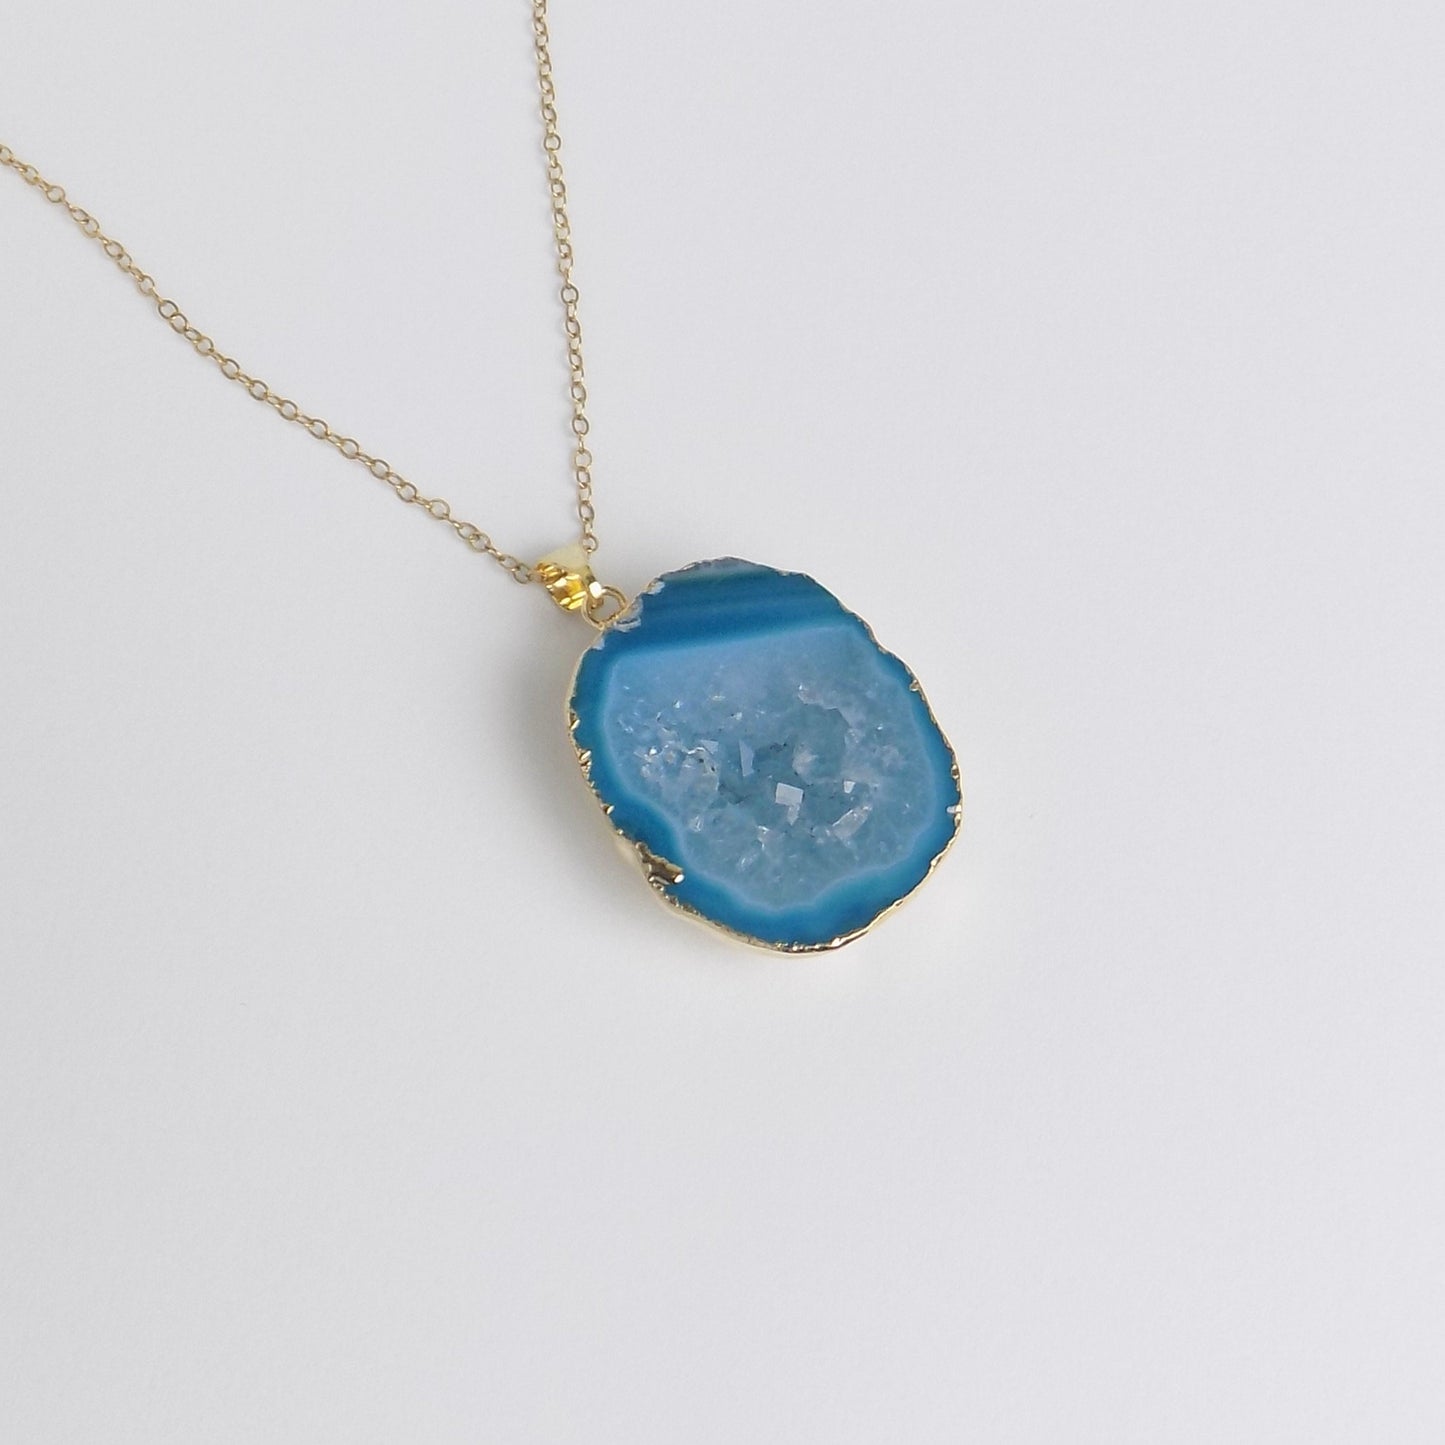 Natural Geode Cave Gemstone Necklace Gold With Sparkly Druzy Center Teal Crystal, G14-213